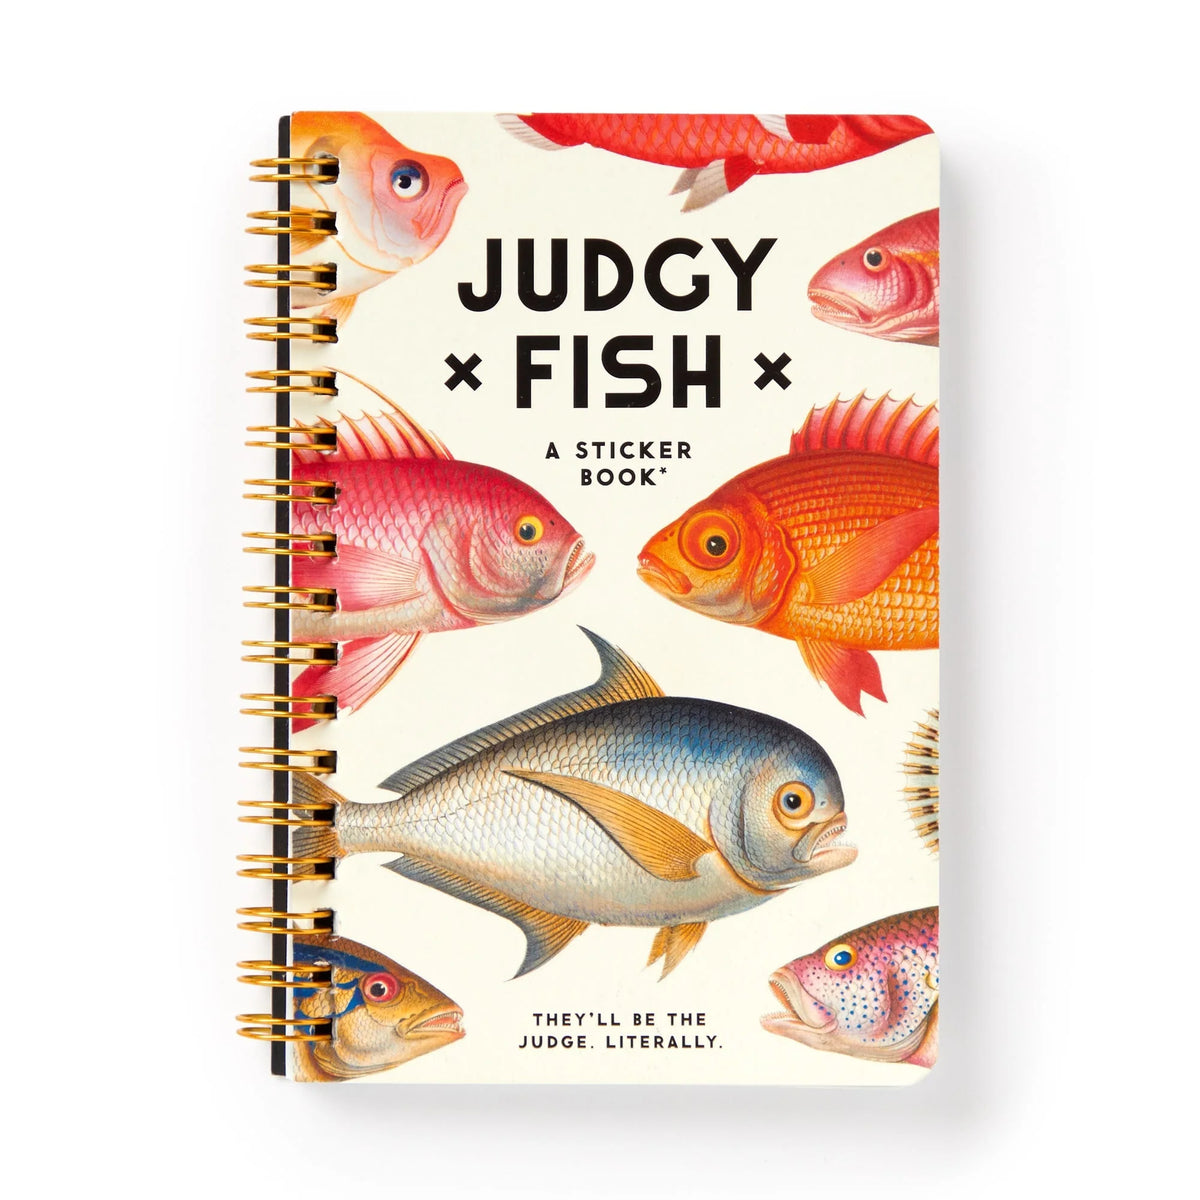 Judgy Fish Sticker Book by brass monkey at penny black